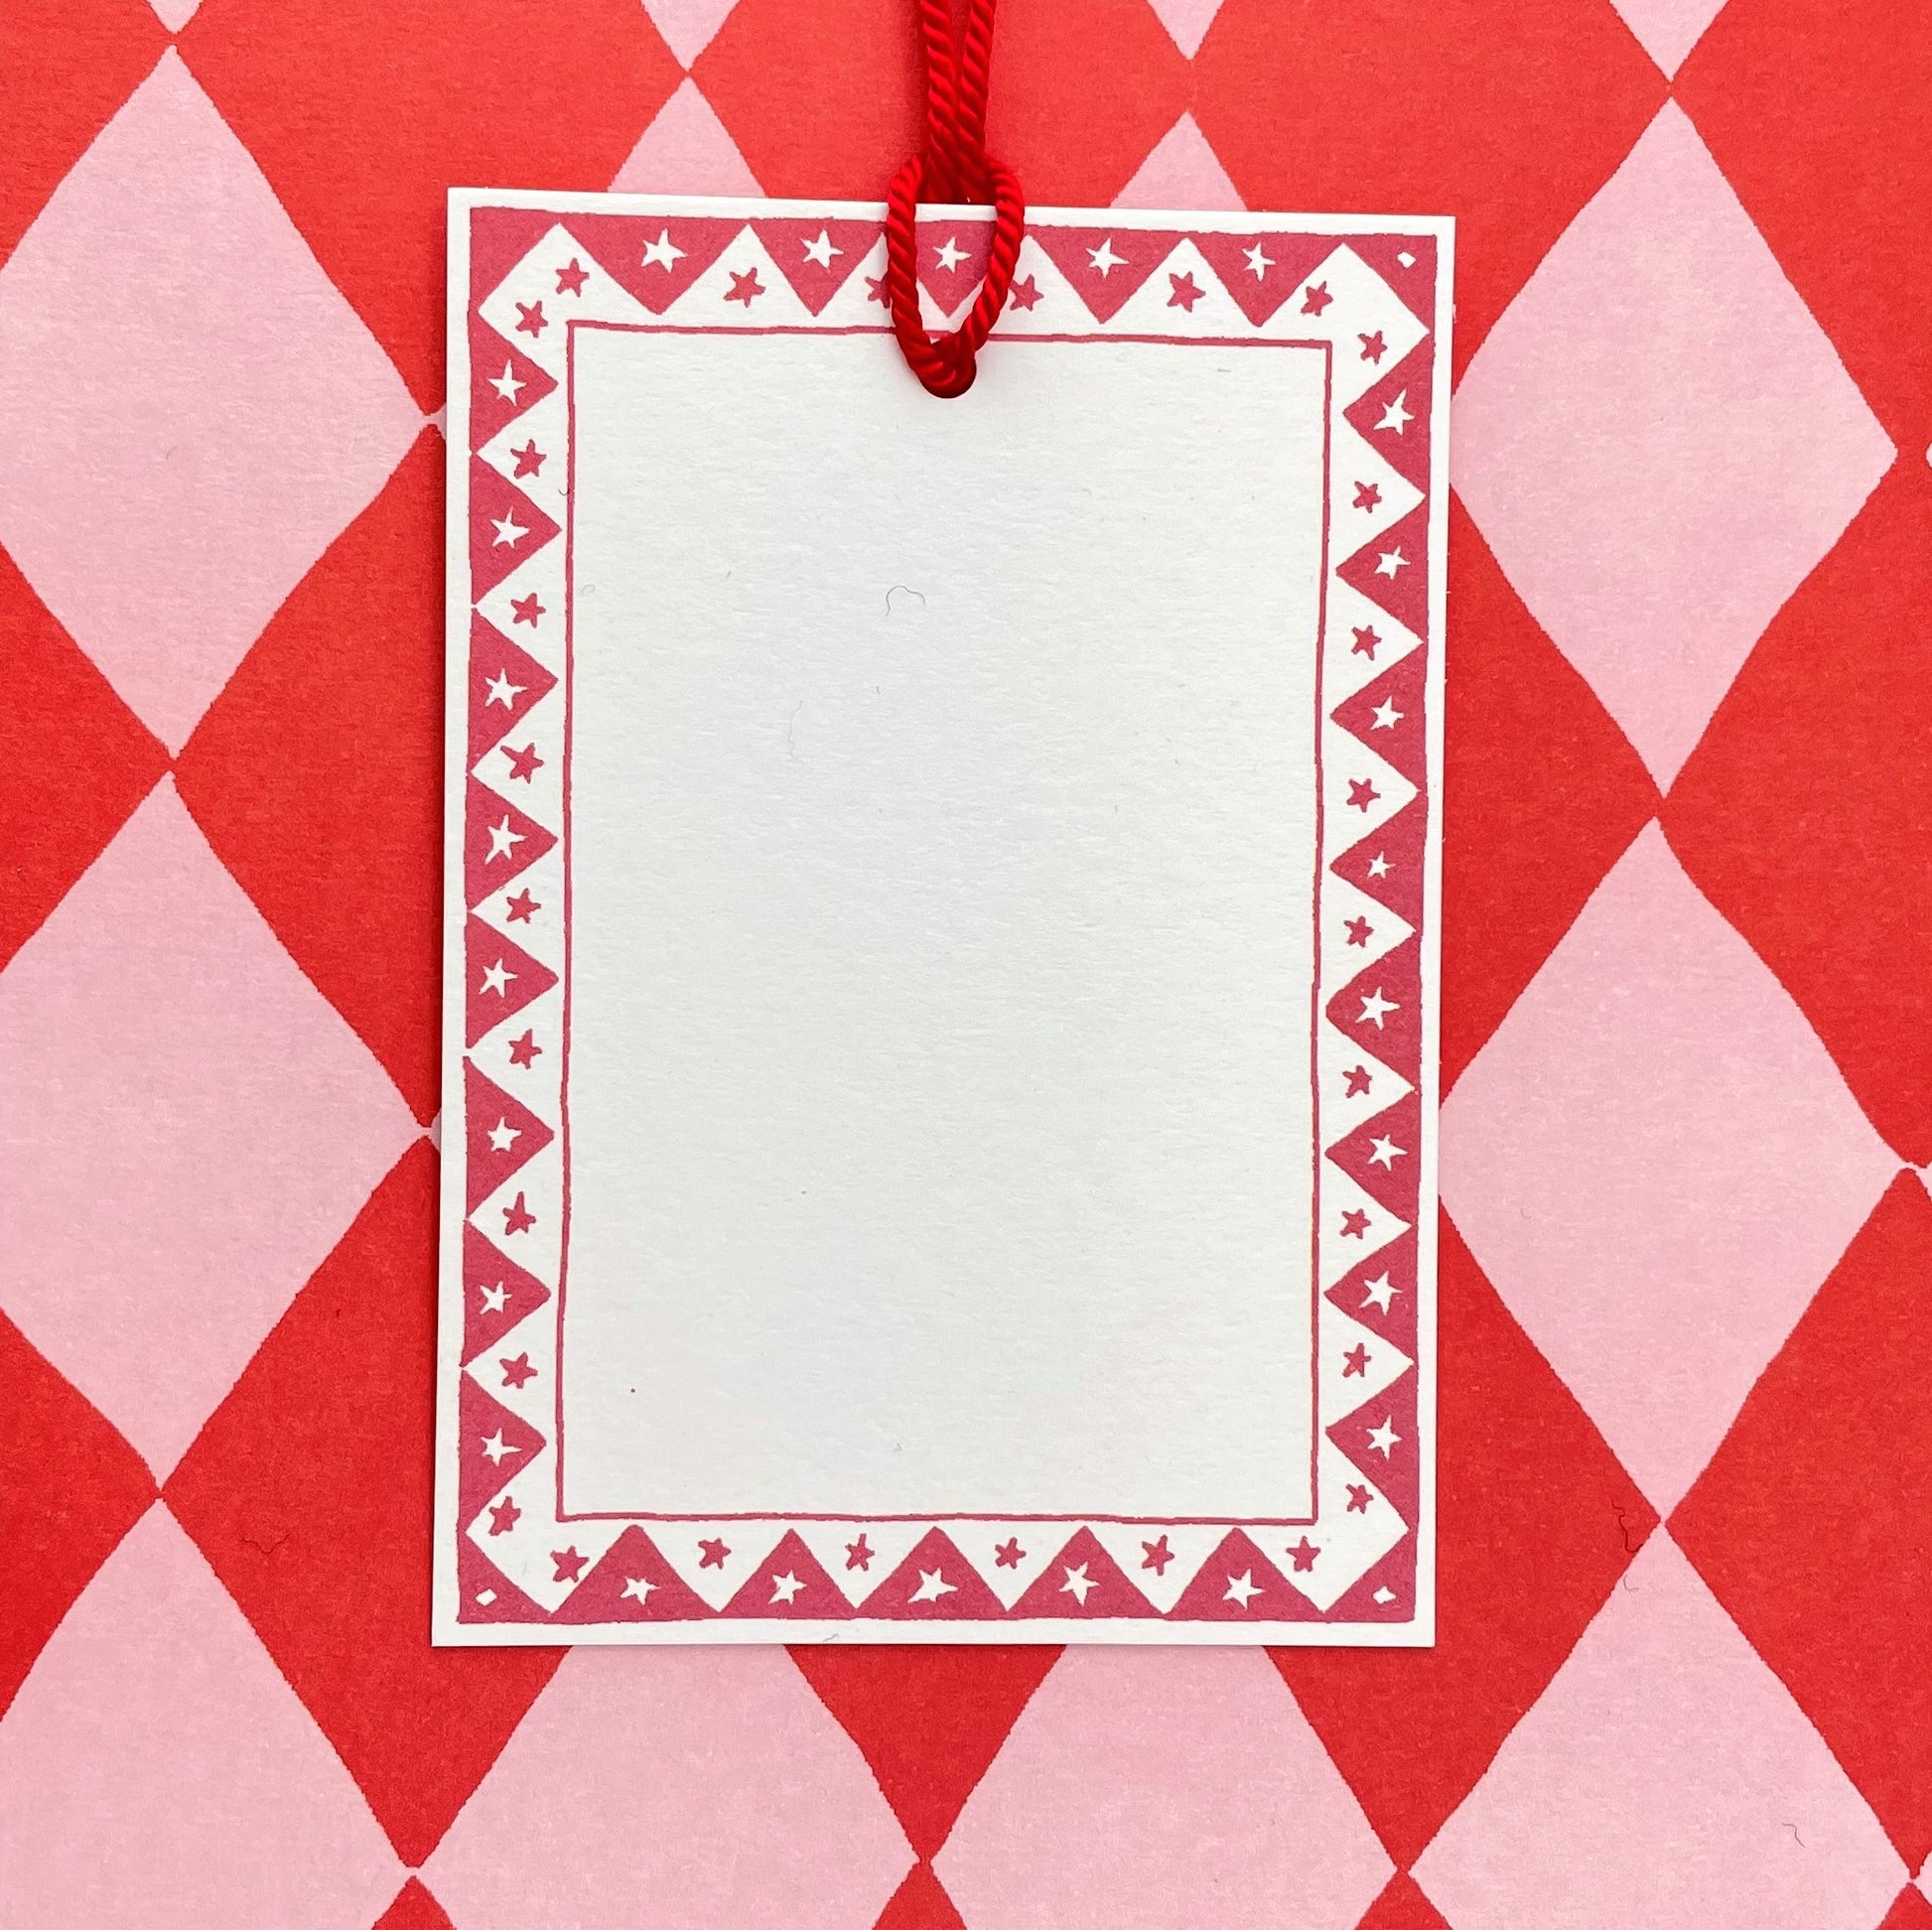 White rectangular gift tag with dark red star pattern border and red cord, pictured with red diamond wrapping paper